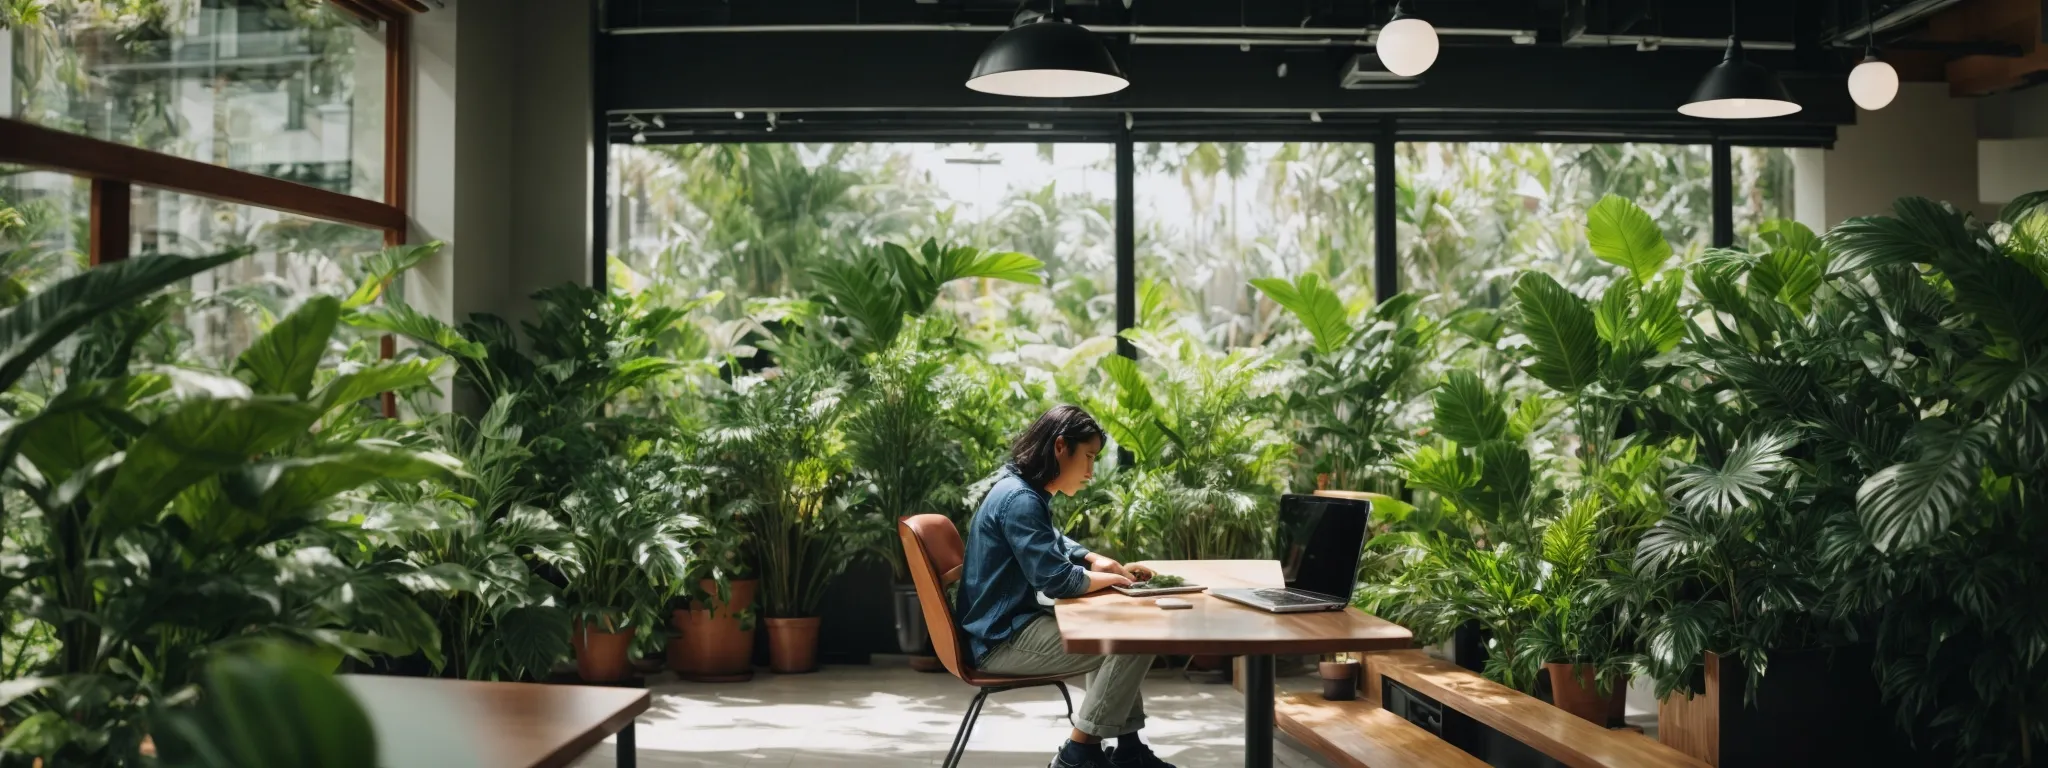 a person sitting comfortably with a laptop in a bright, modern coffee shop, focused intently on the screen amidst a backdrop of lush green indoor plants.